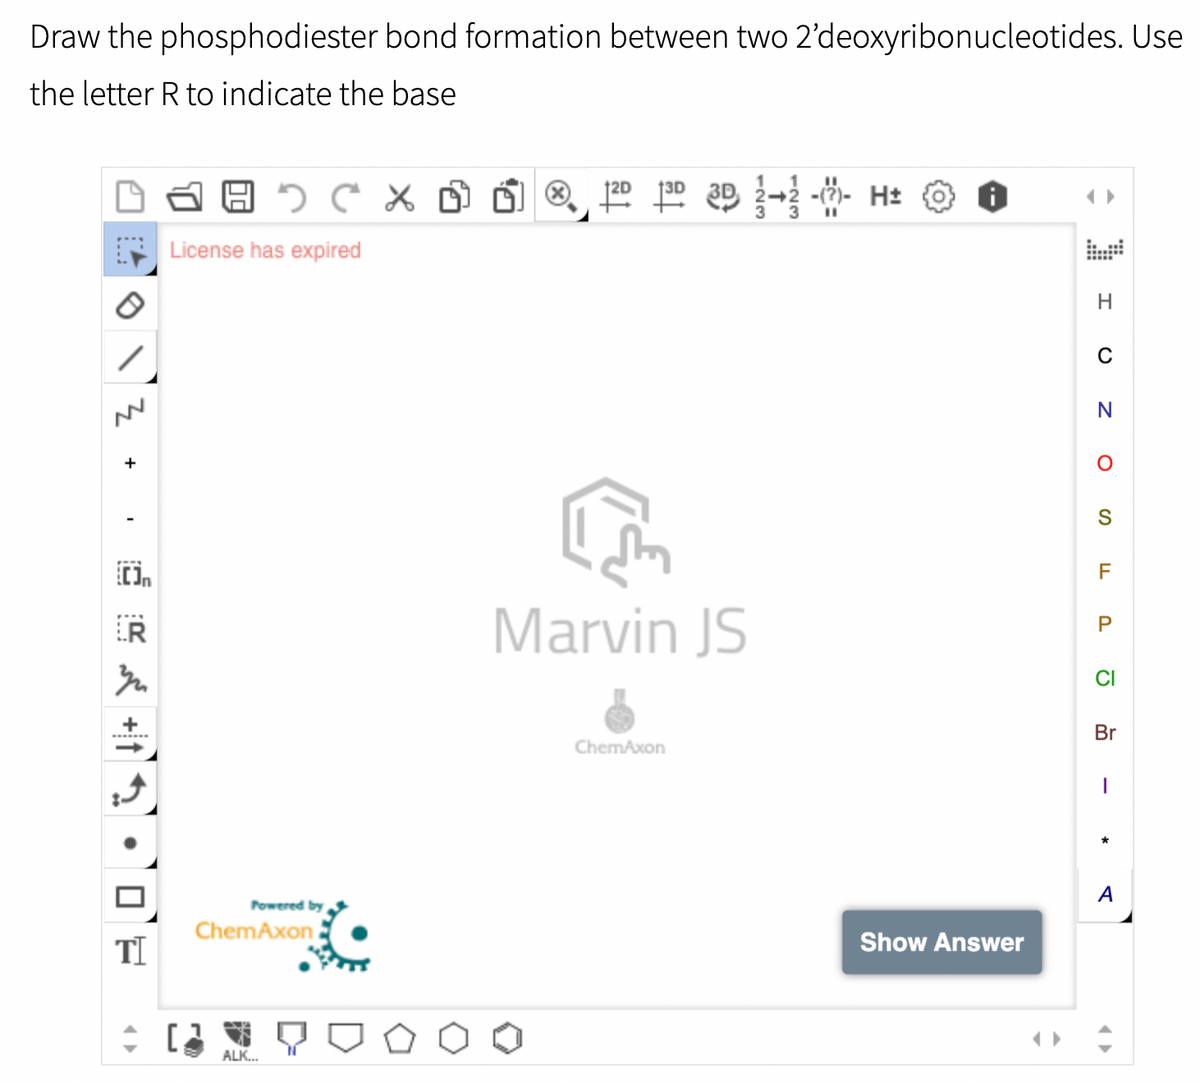 Draw the
the letter R to indicate the base
CX
License has expired
로
+
{[]n
phosphodiester bond formation between two 2'deoxyribonucleotides. Use
1
120 130 3D 2-2 -- H±
H
C
N
M² +
Powered by
ChemAxon
ALK...
TI
+ [2
Marvin JS
ChemAxon
Show Answer
O
S
F
P
CI
Br
I
*
A